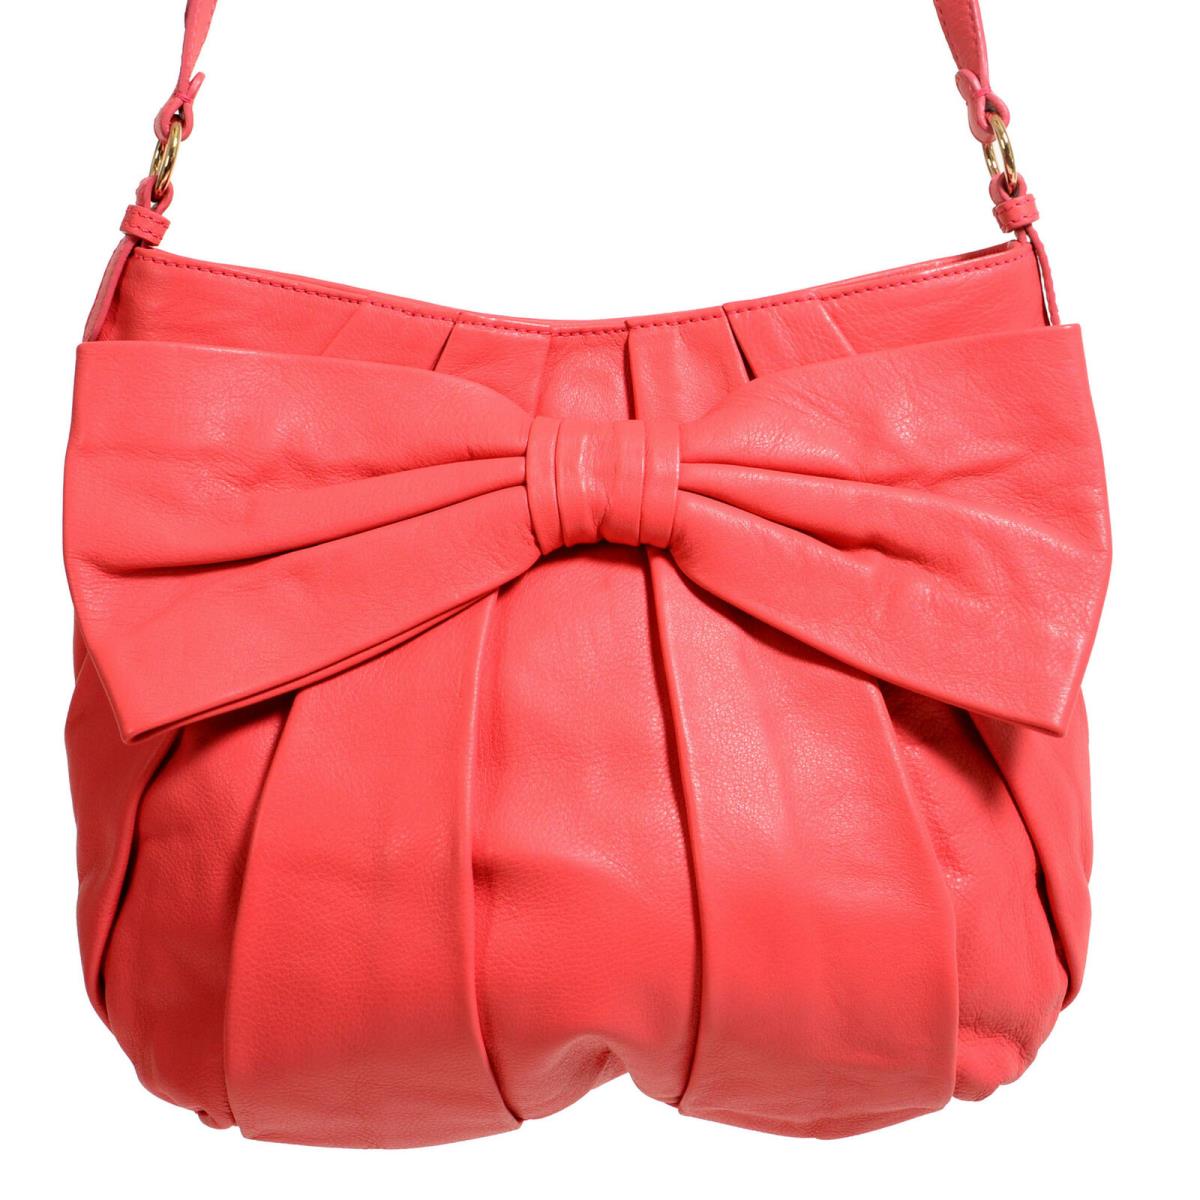 Red Valentino Women`s Pink Bow Decorated Leather Shoulder Bag